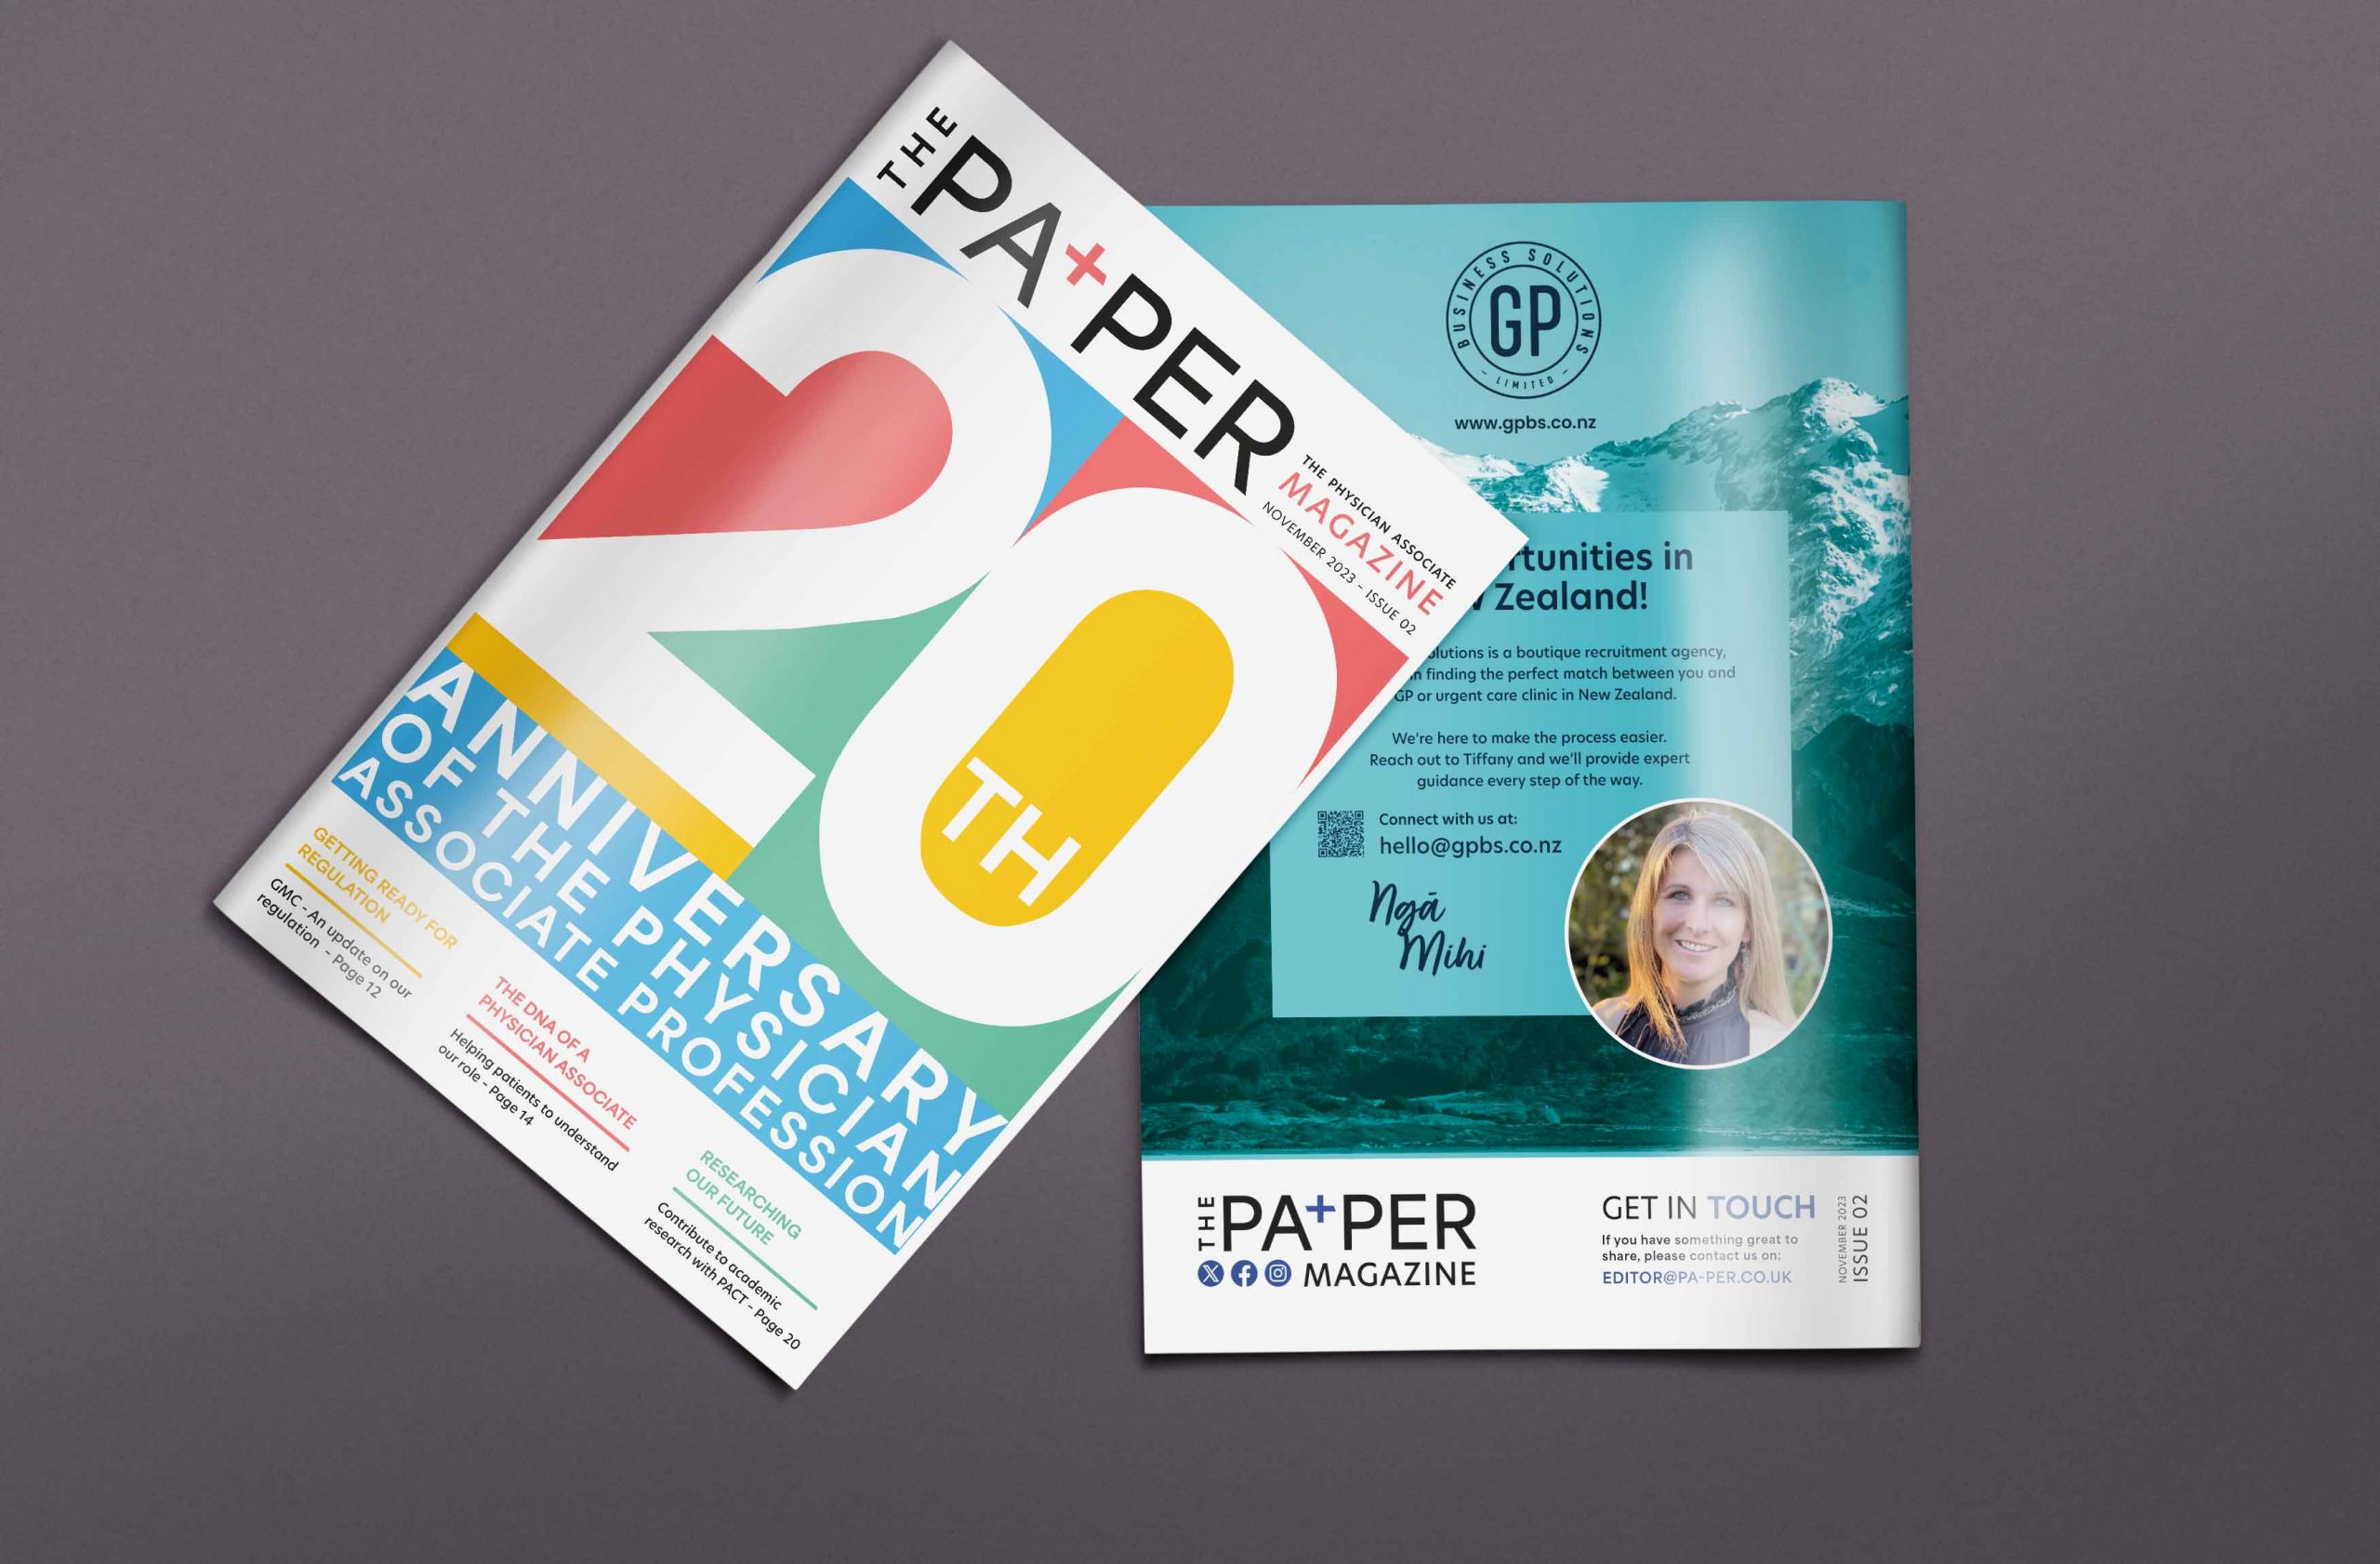 Launching Issue Two of The PA+PER!